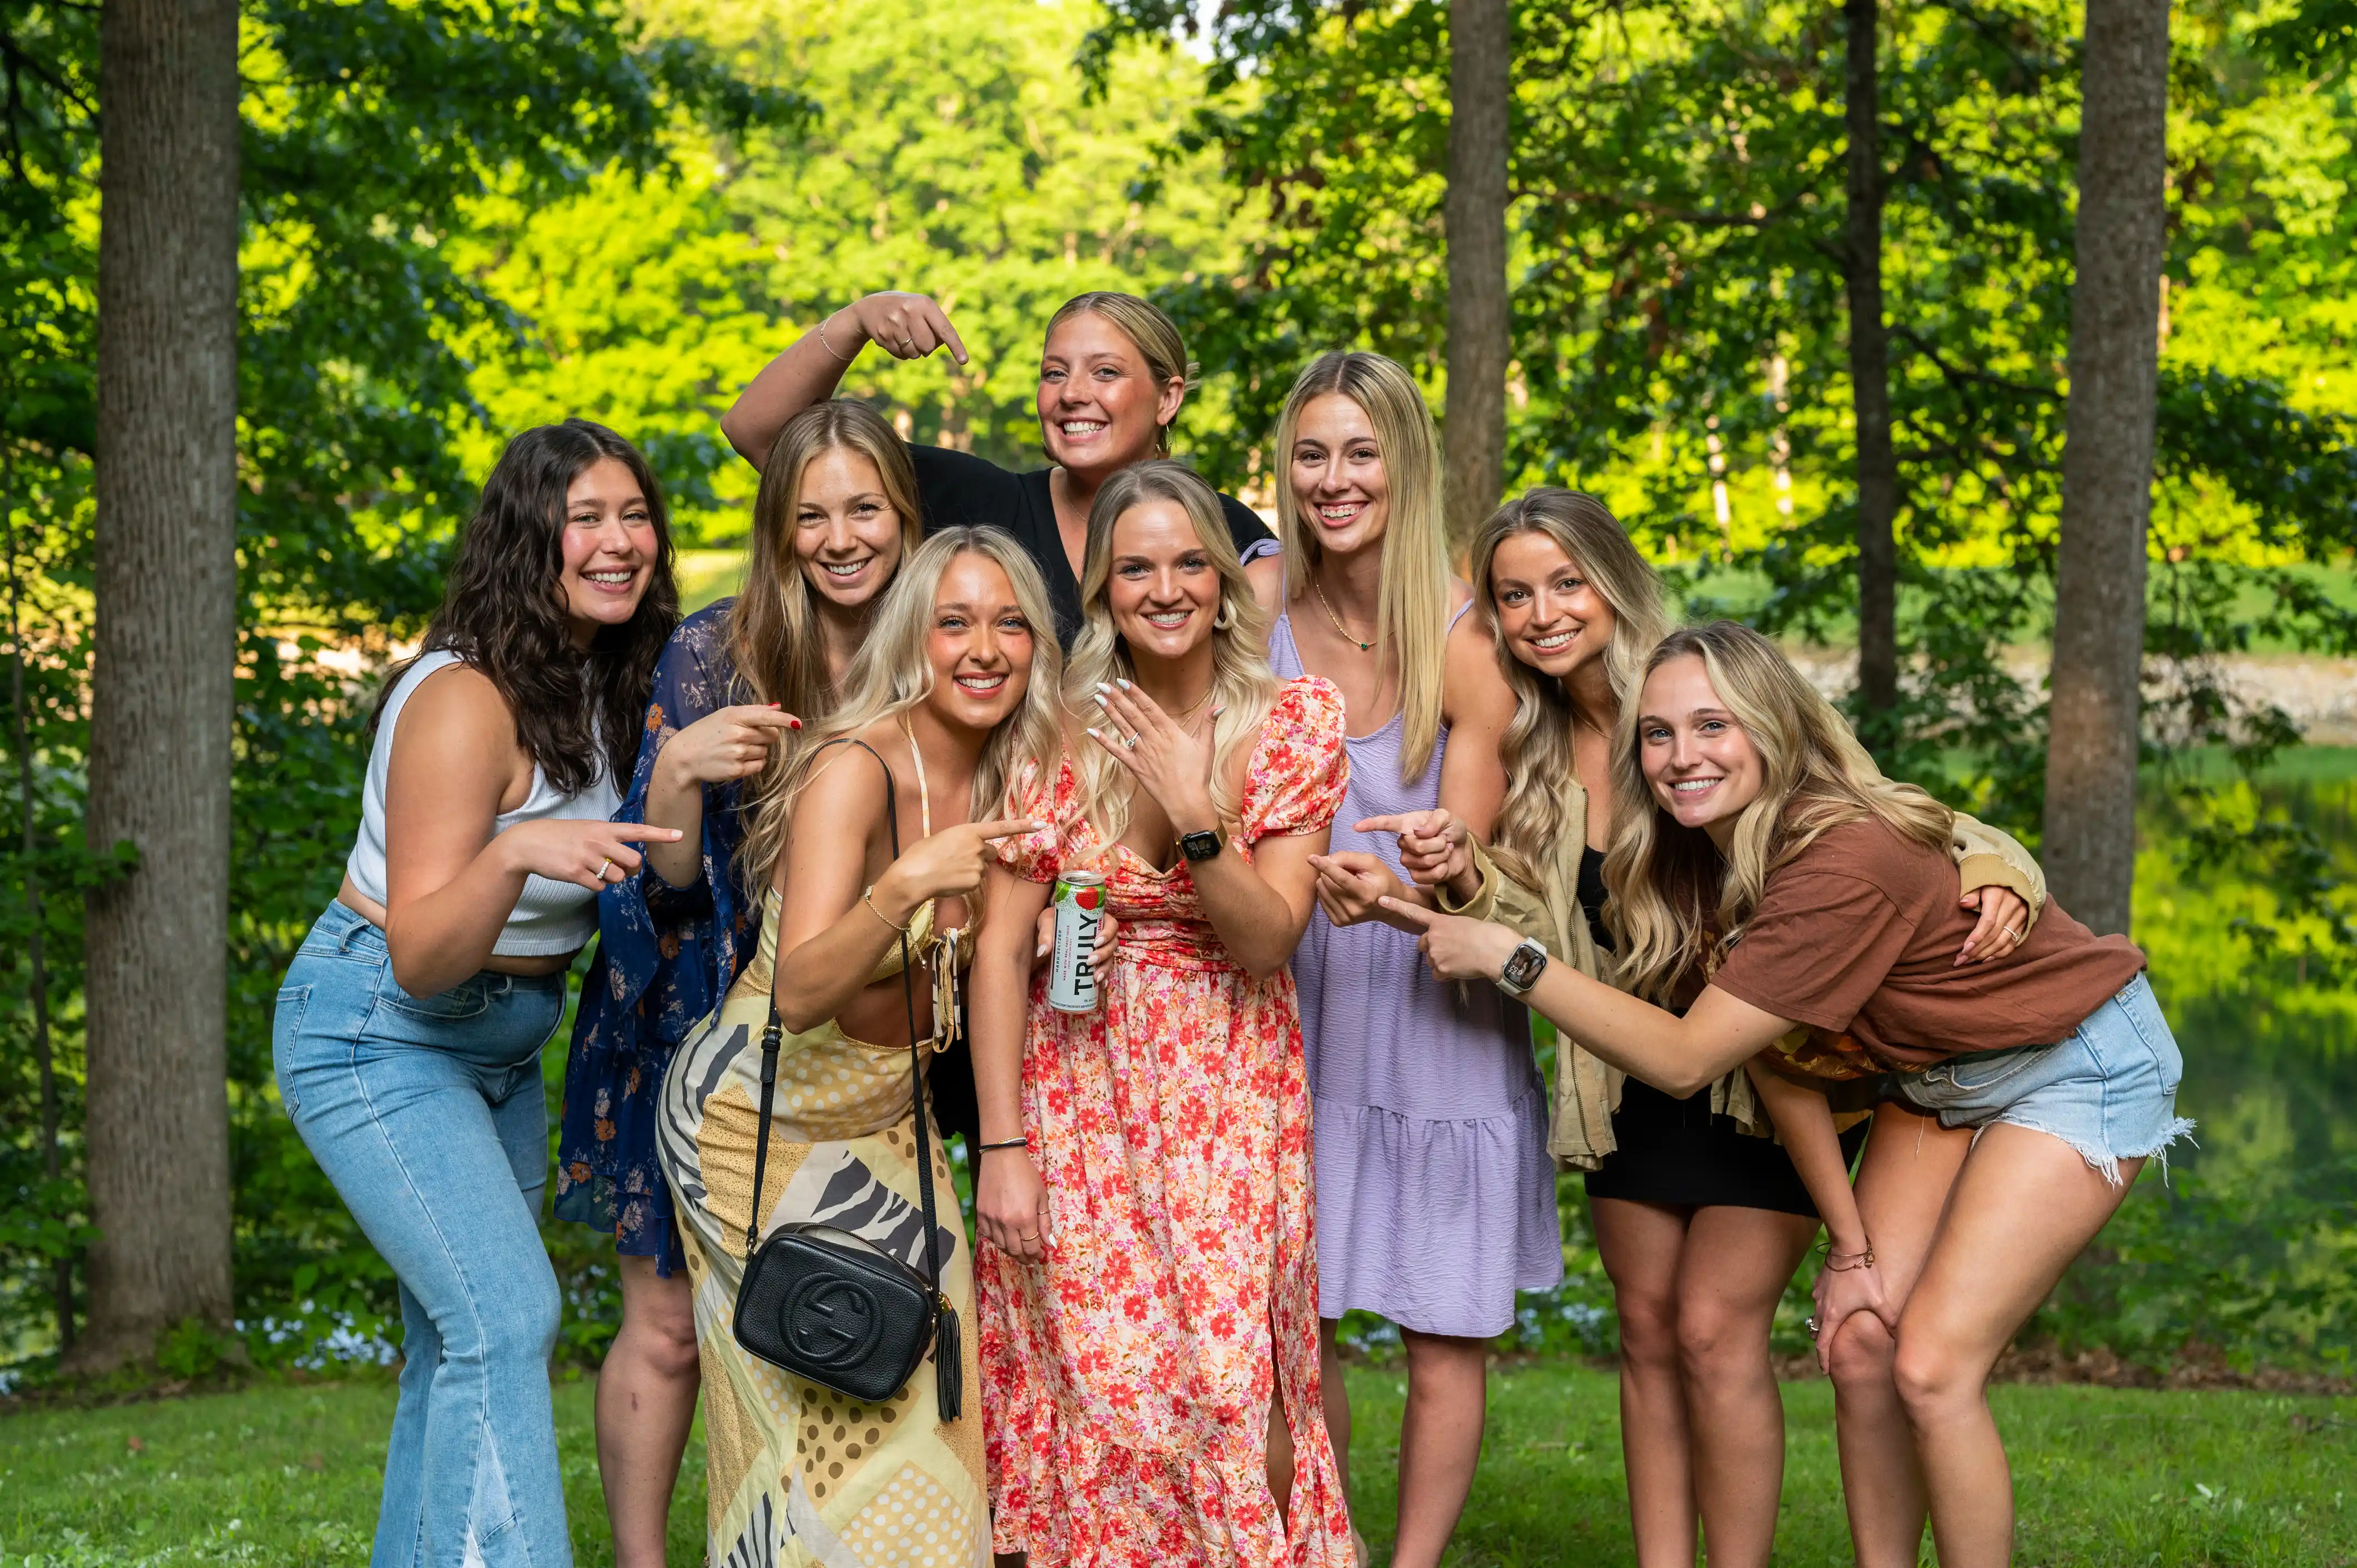 Group of happy women smiling and posing together outdoors.